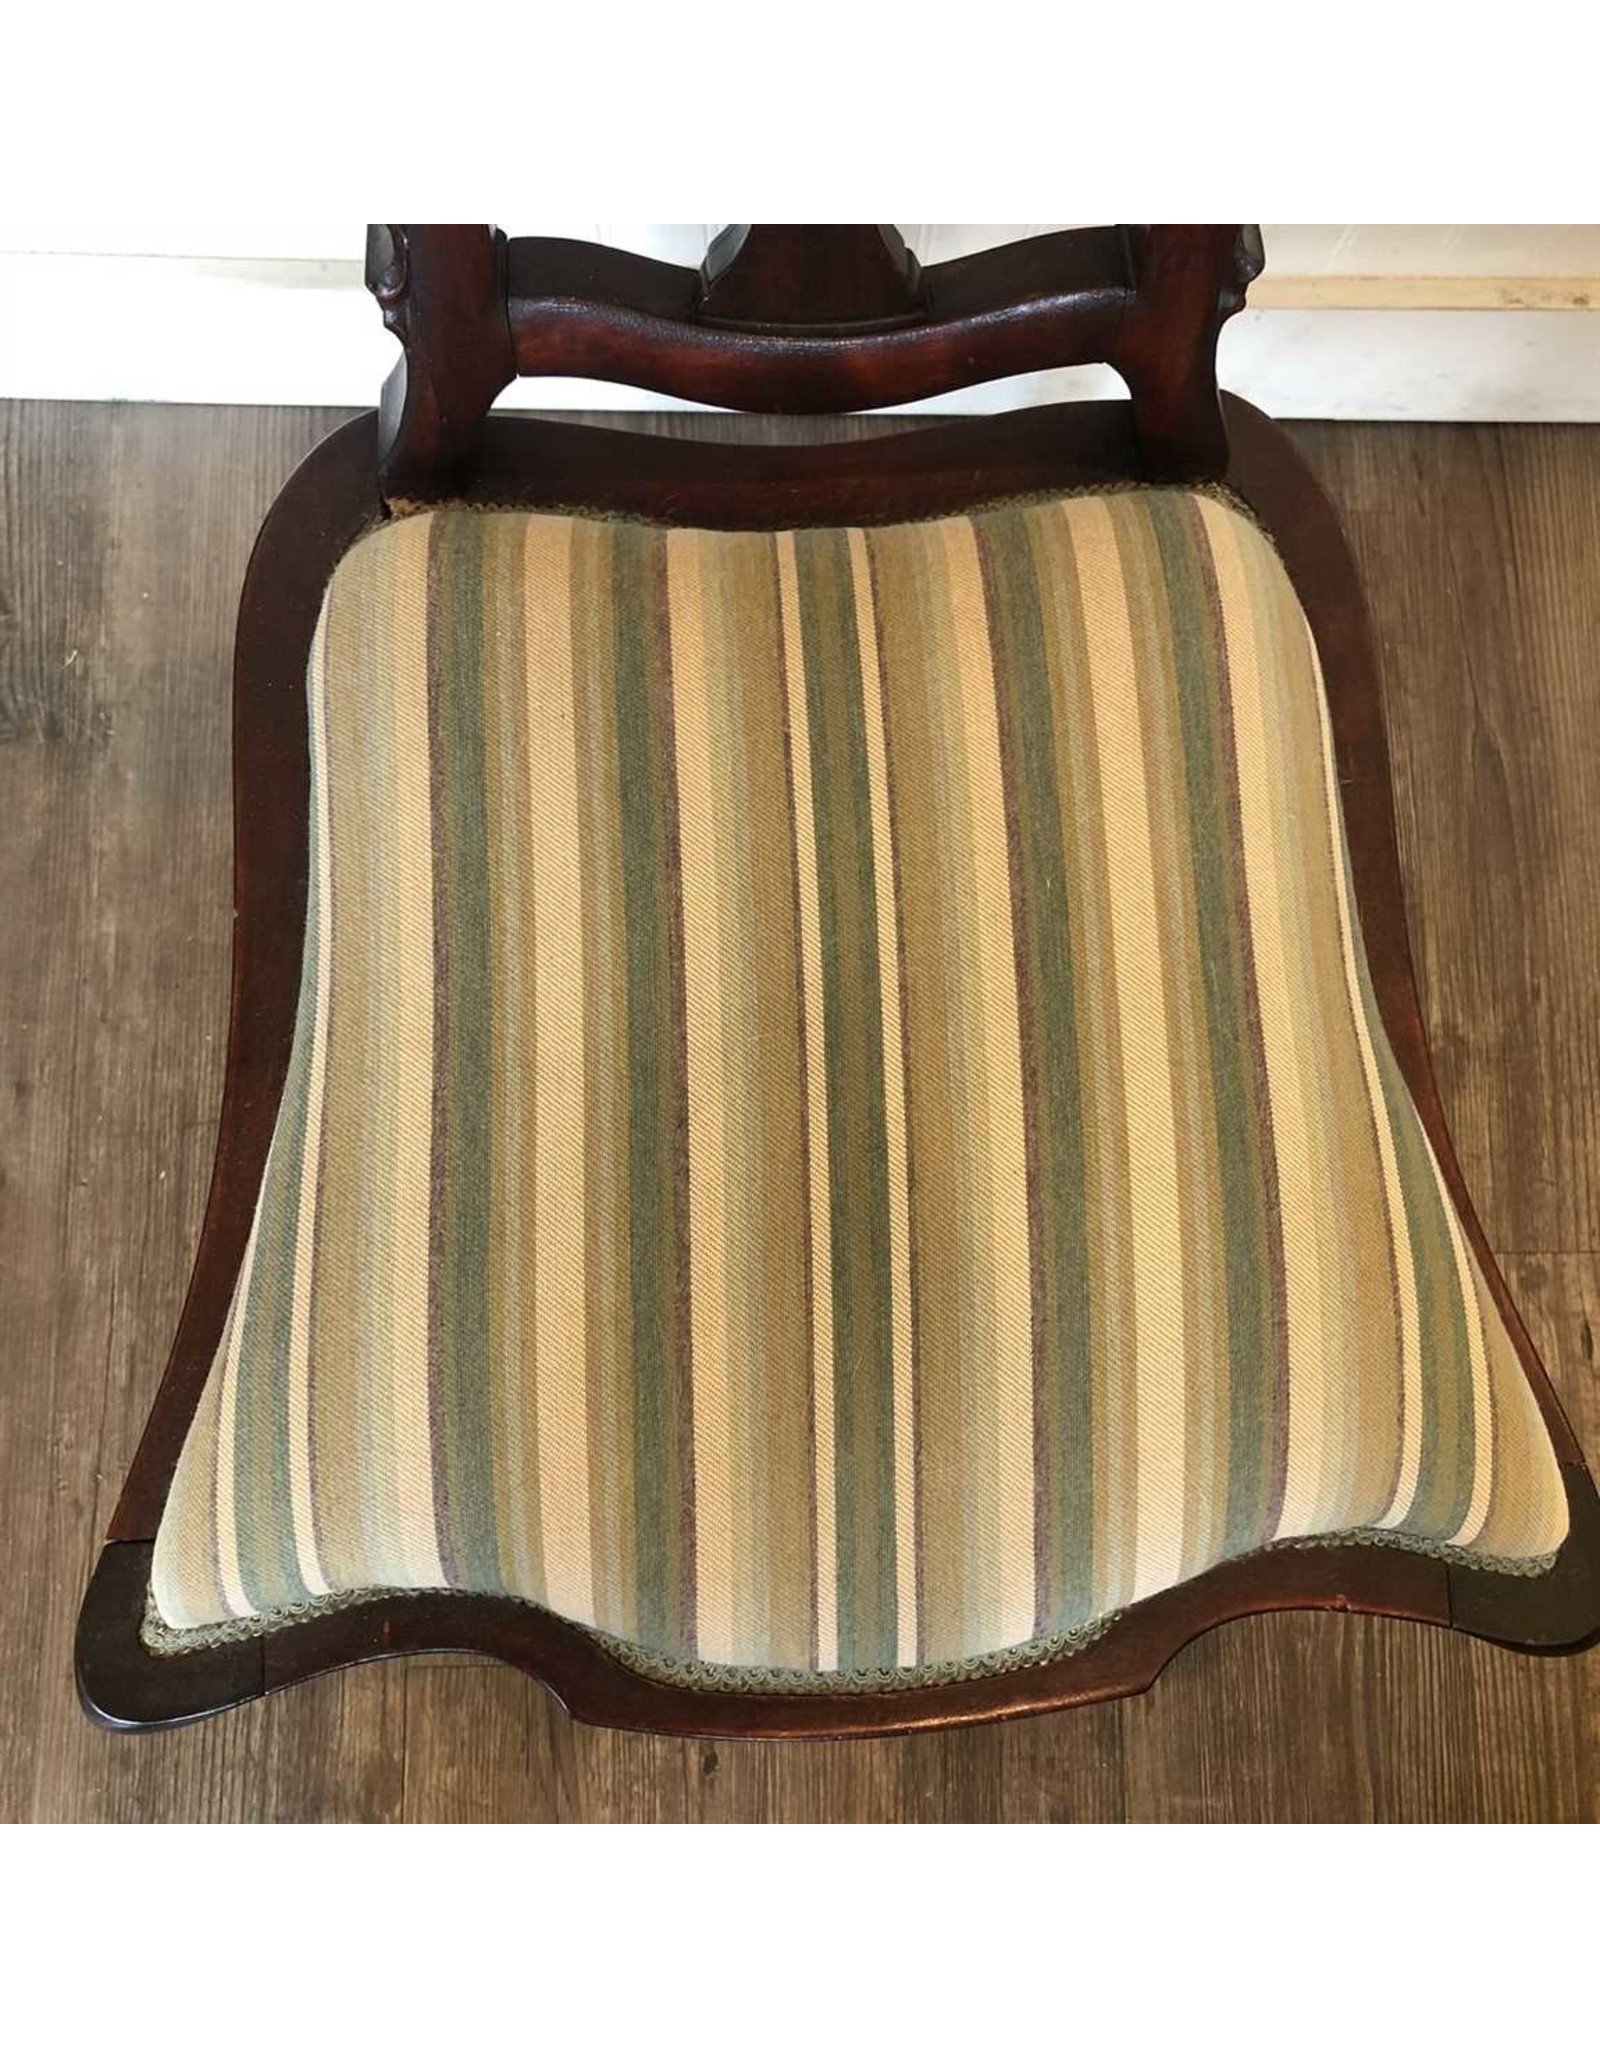 Occasional chair - green striped upholstery, carved mahogany back and feet